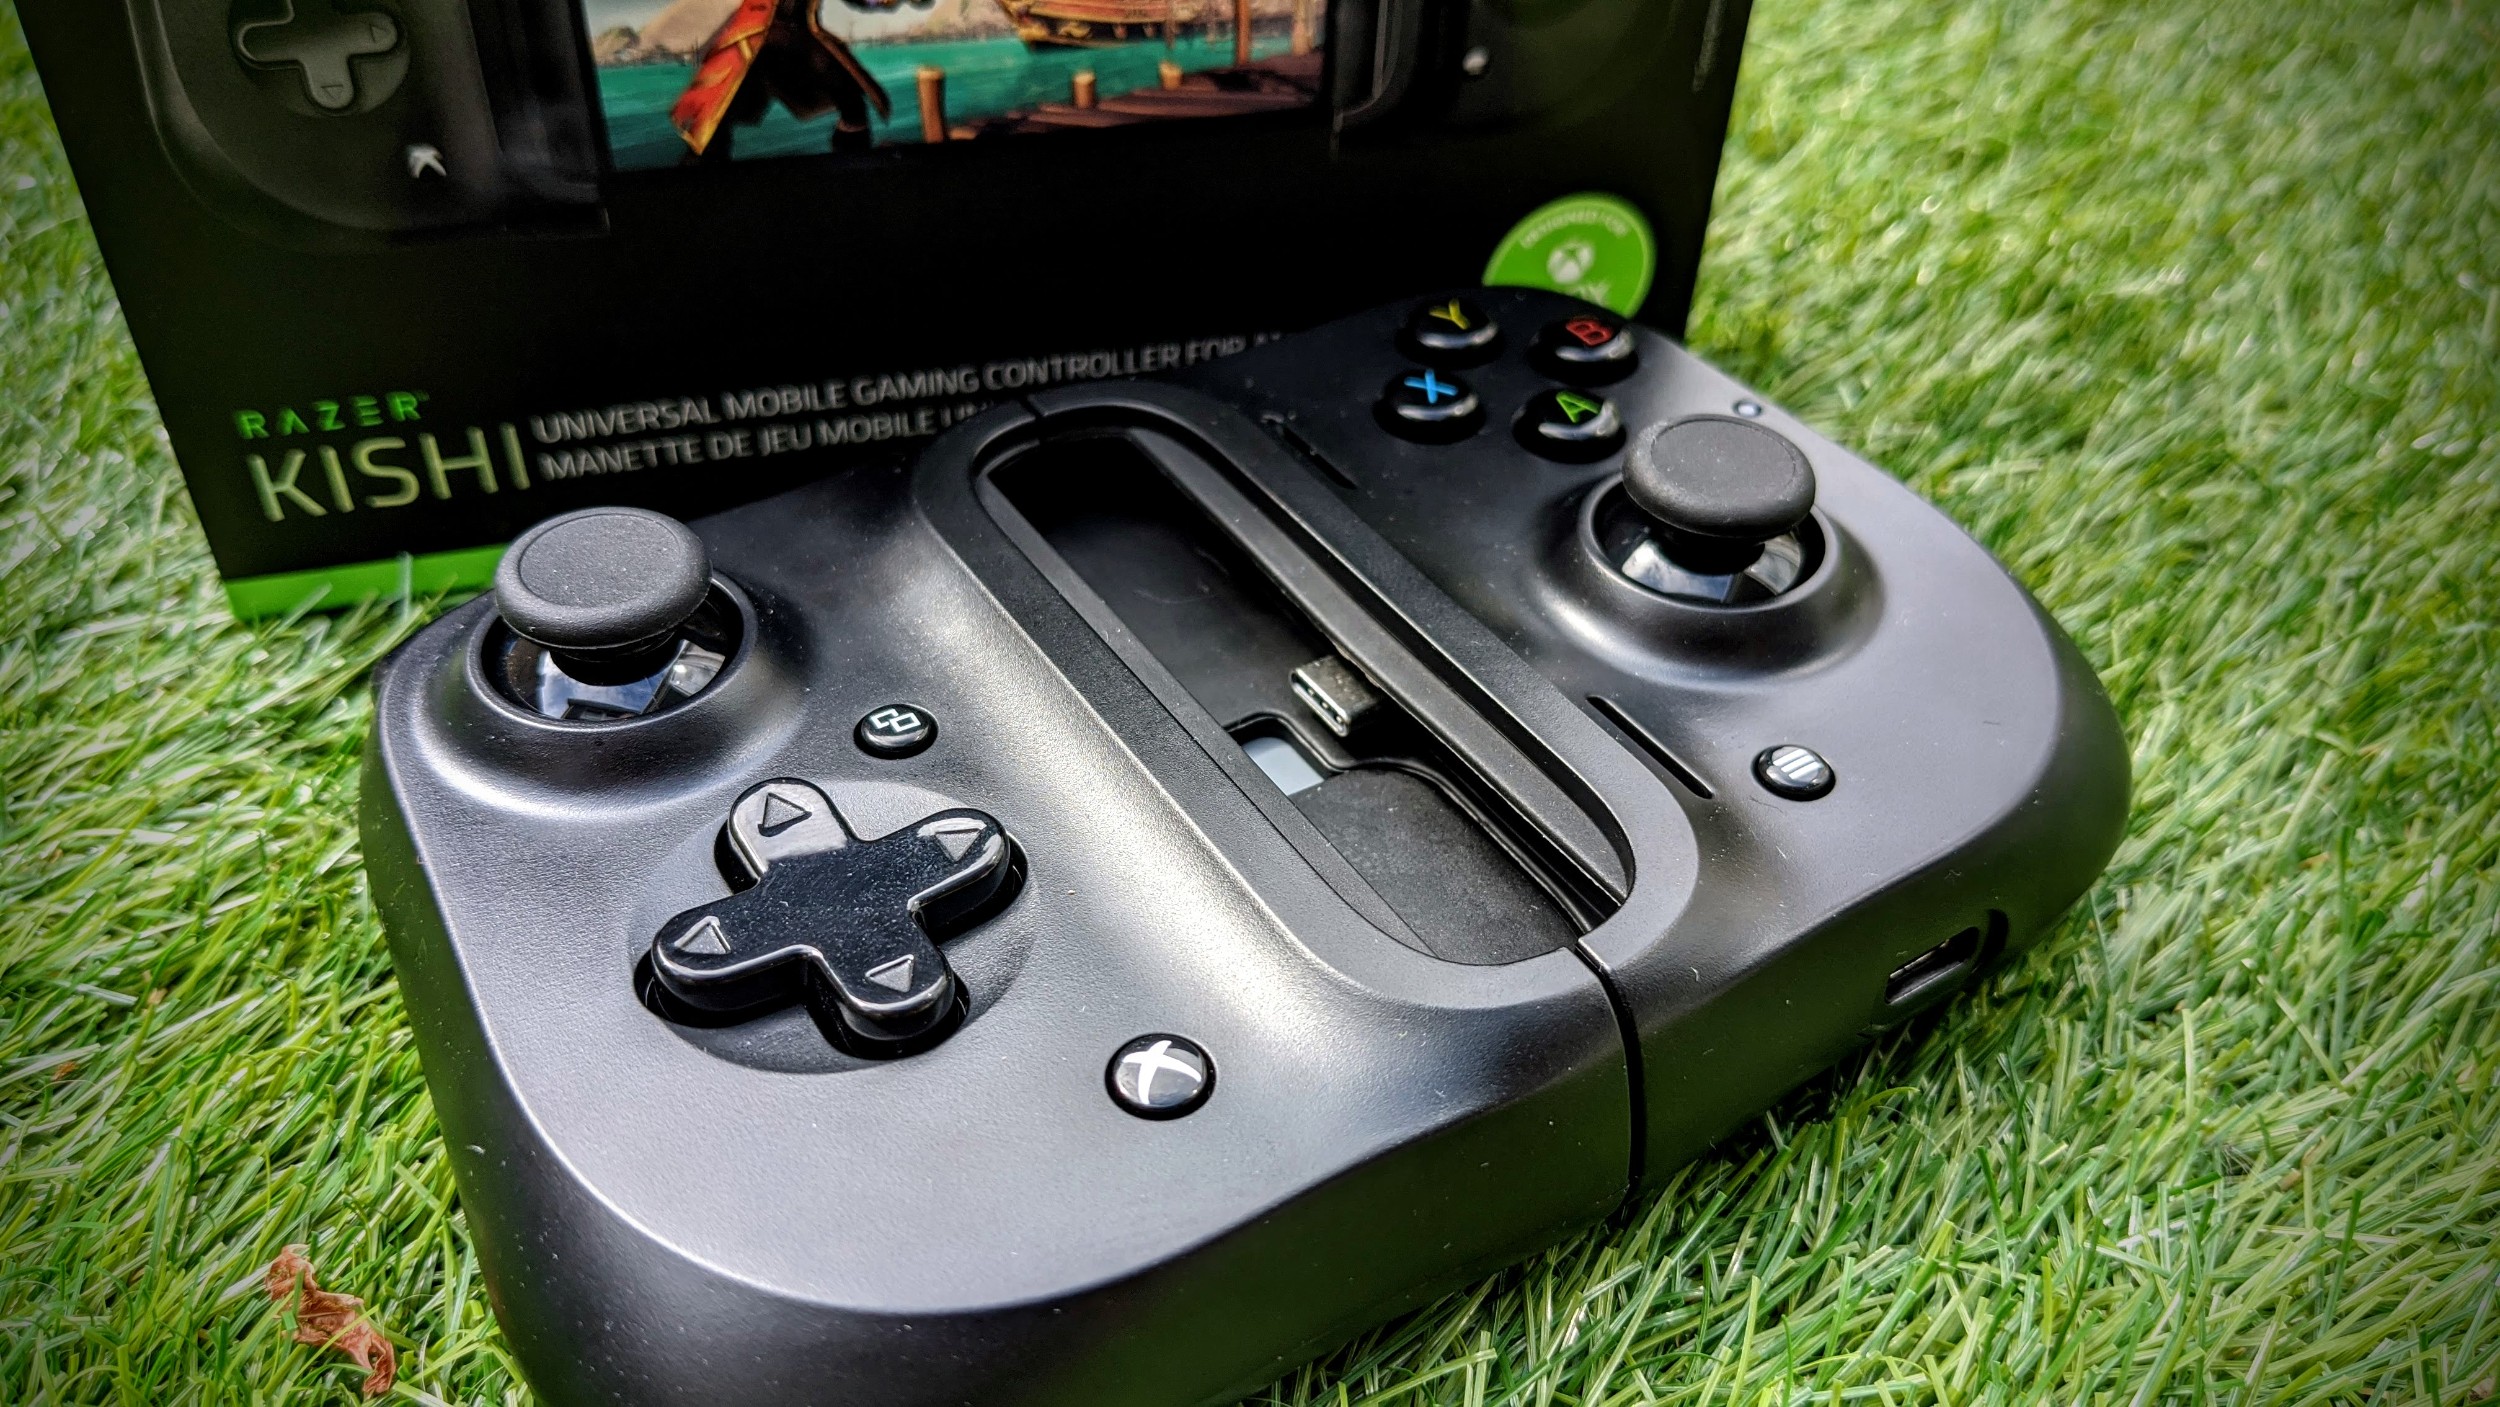 Razer Kishi Review - A Great Gaming Controller for Android Smartphones